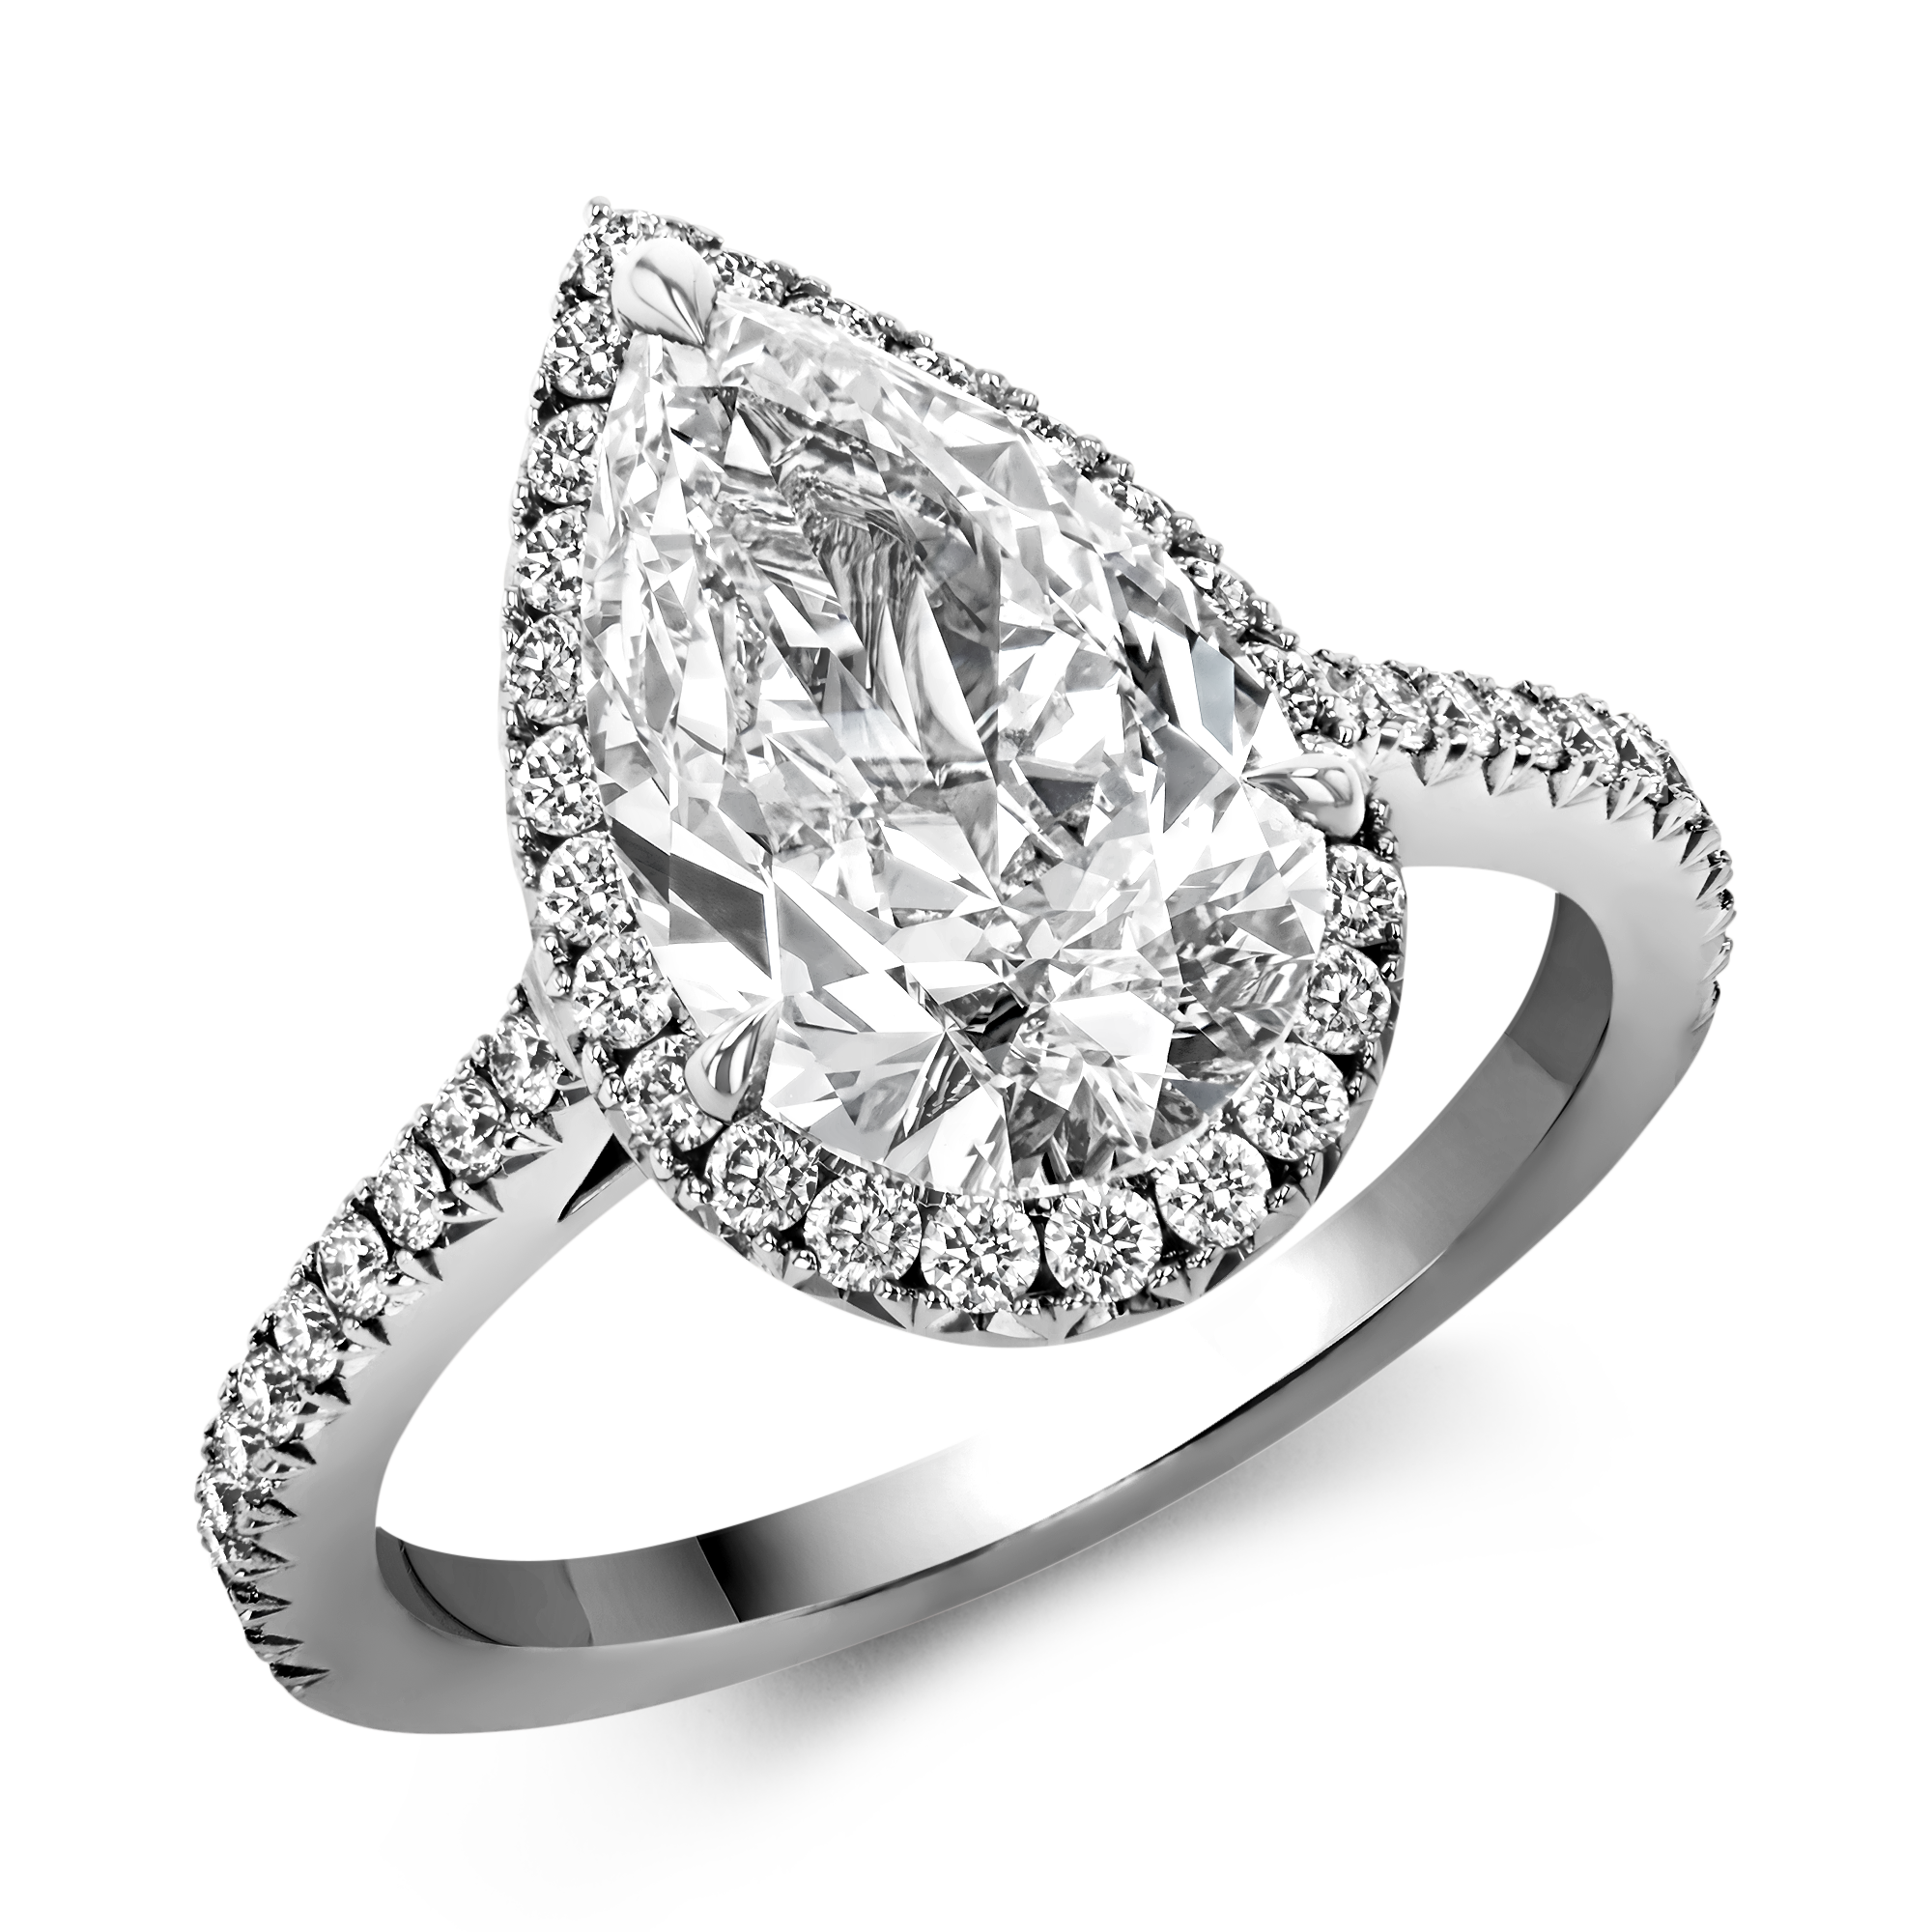 Pearshape 3.02ct Diamond Cluster Ring Pearshape, Claw Set_1